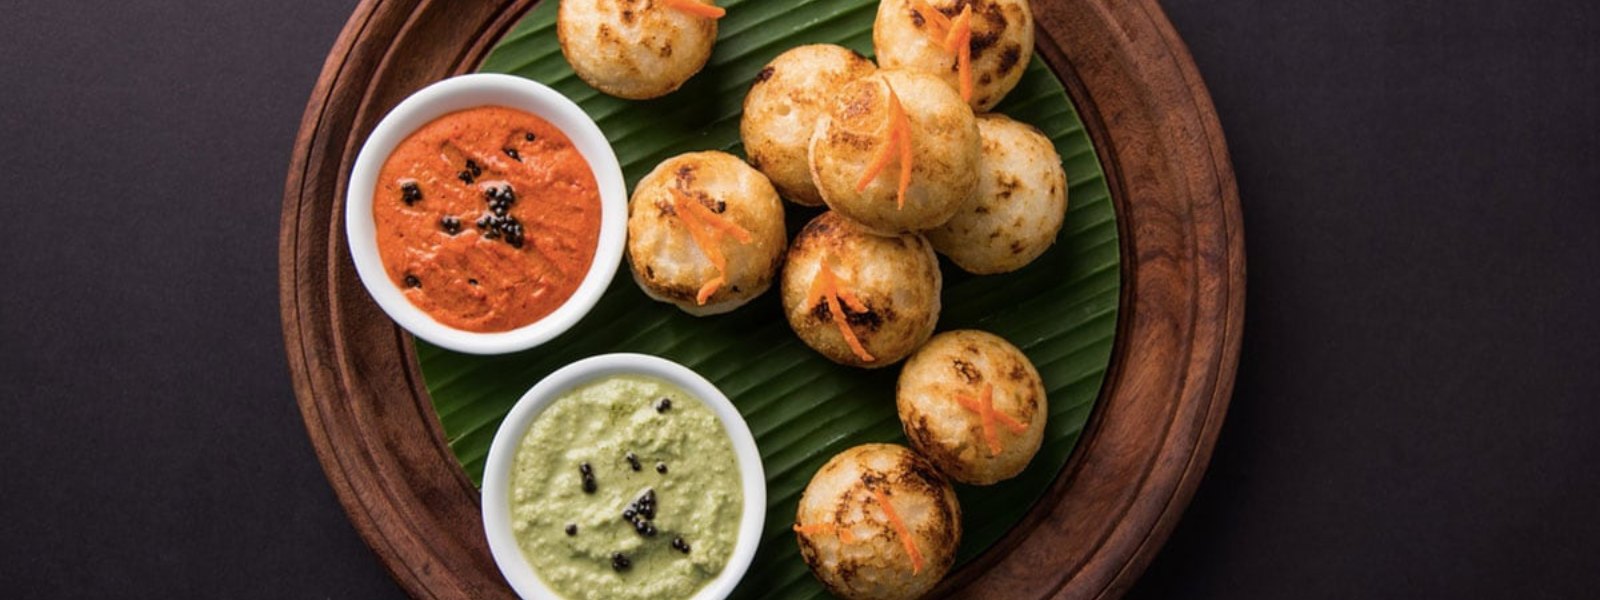 Egg Appe: South Indian Delight in a Cast Iron Paniyaram Pan